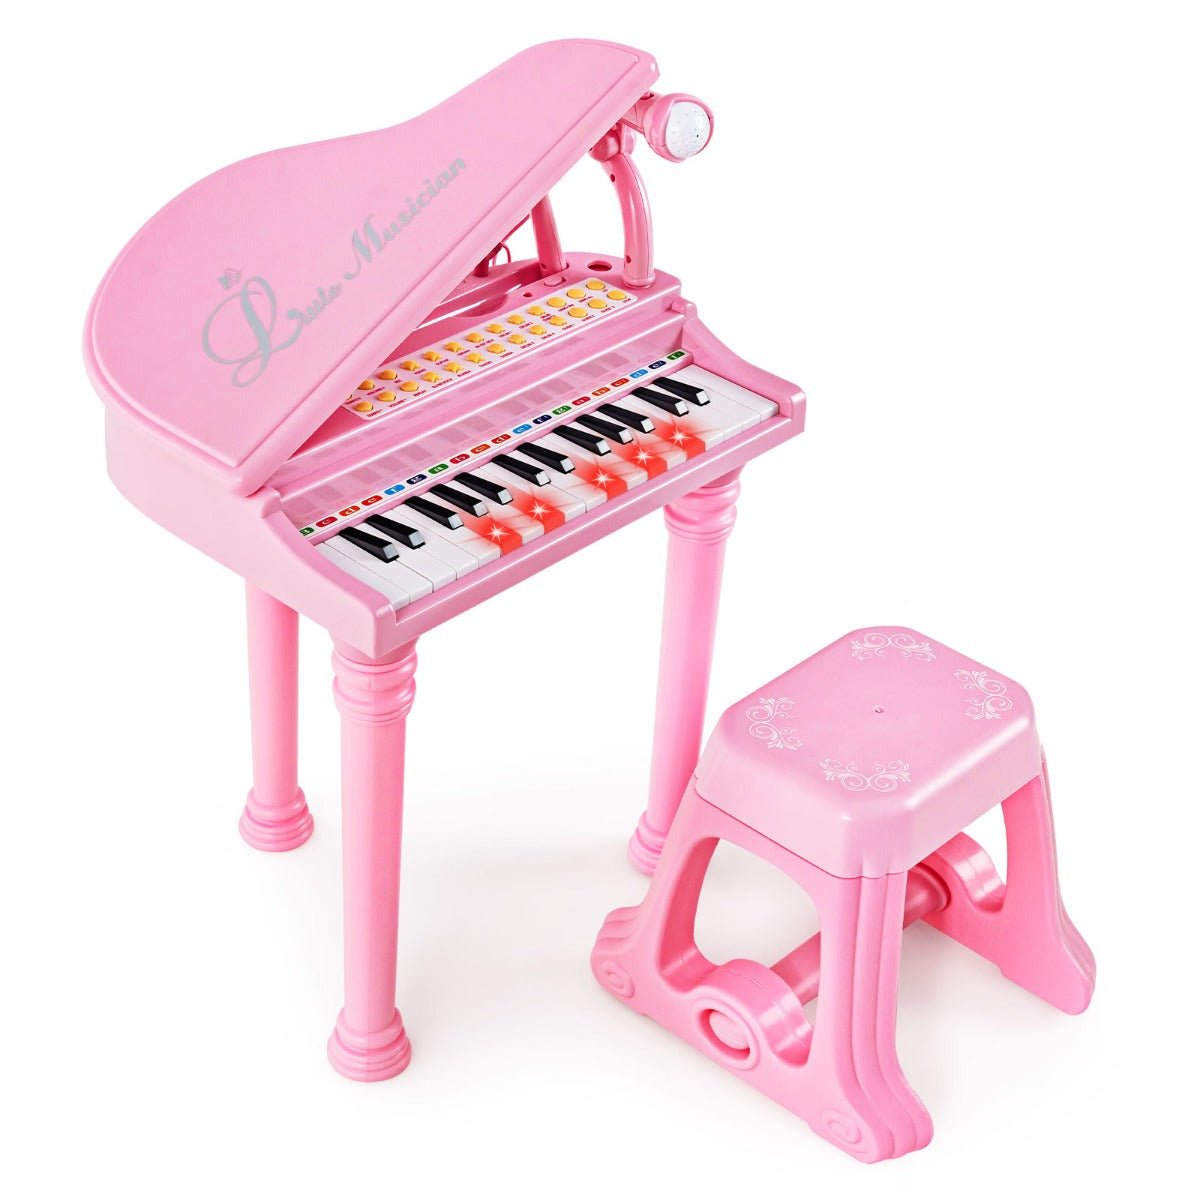 Shop the Pink 31-Key Kids Piano Keyboard with Stool and Microphone